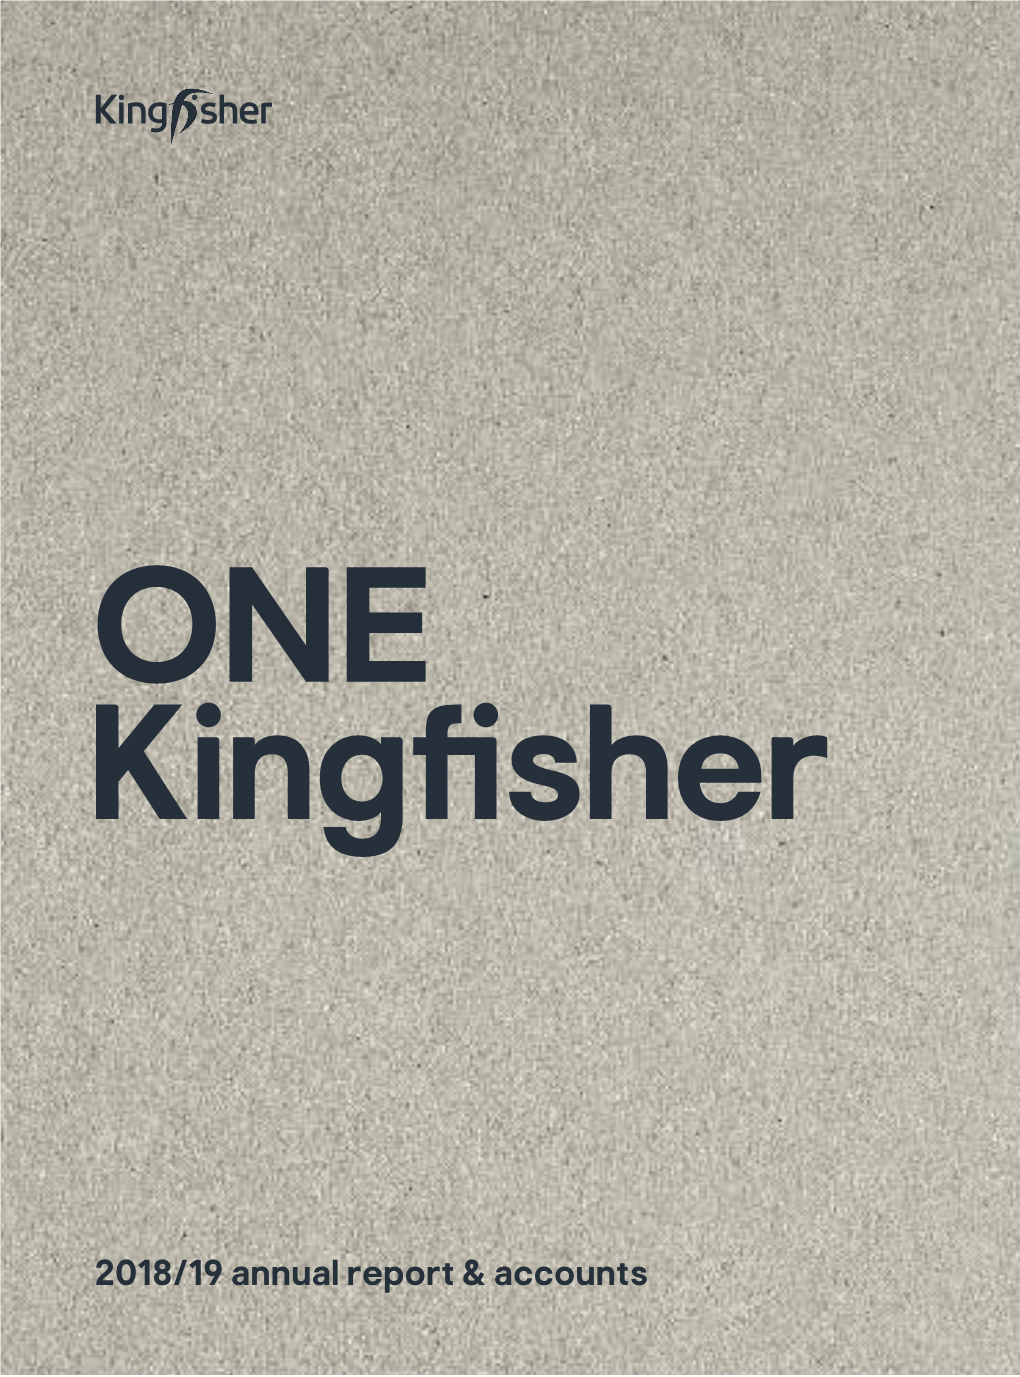 Kingfisher Plc Annual Report 2018/19